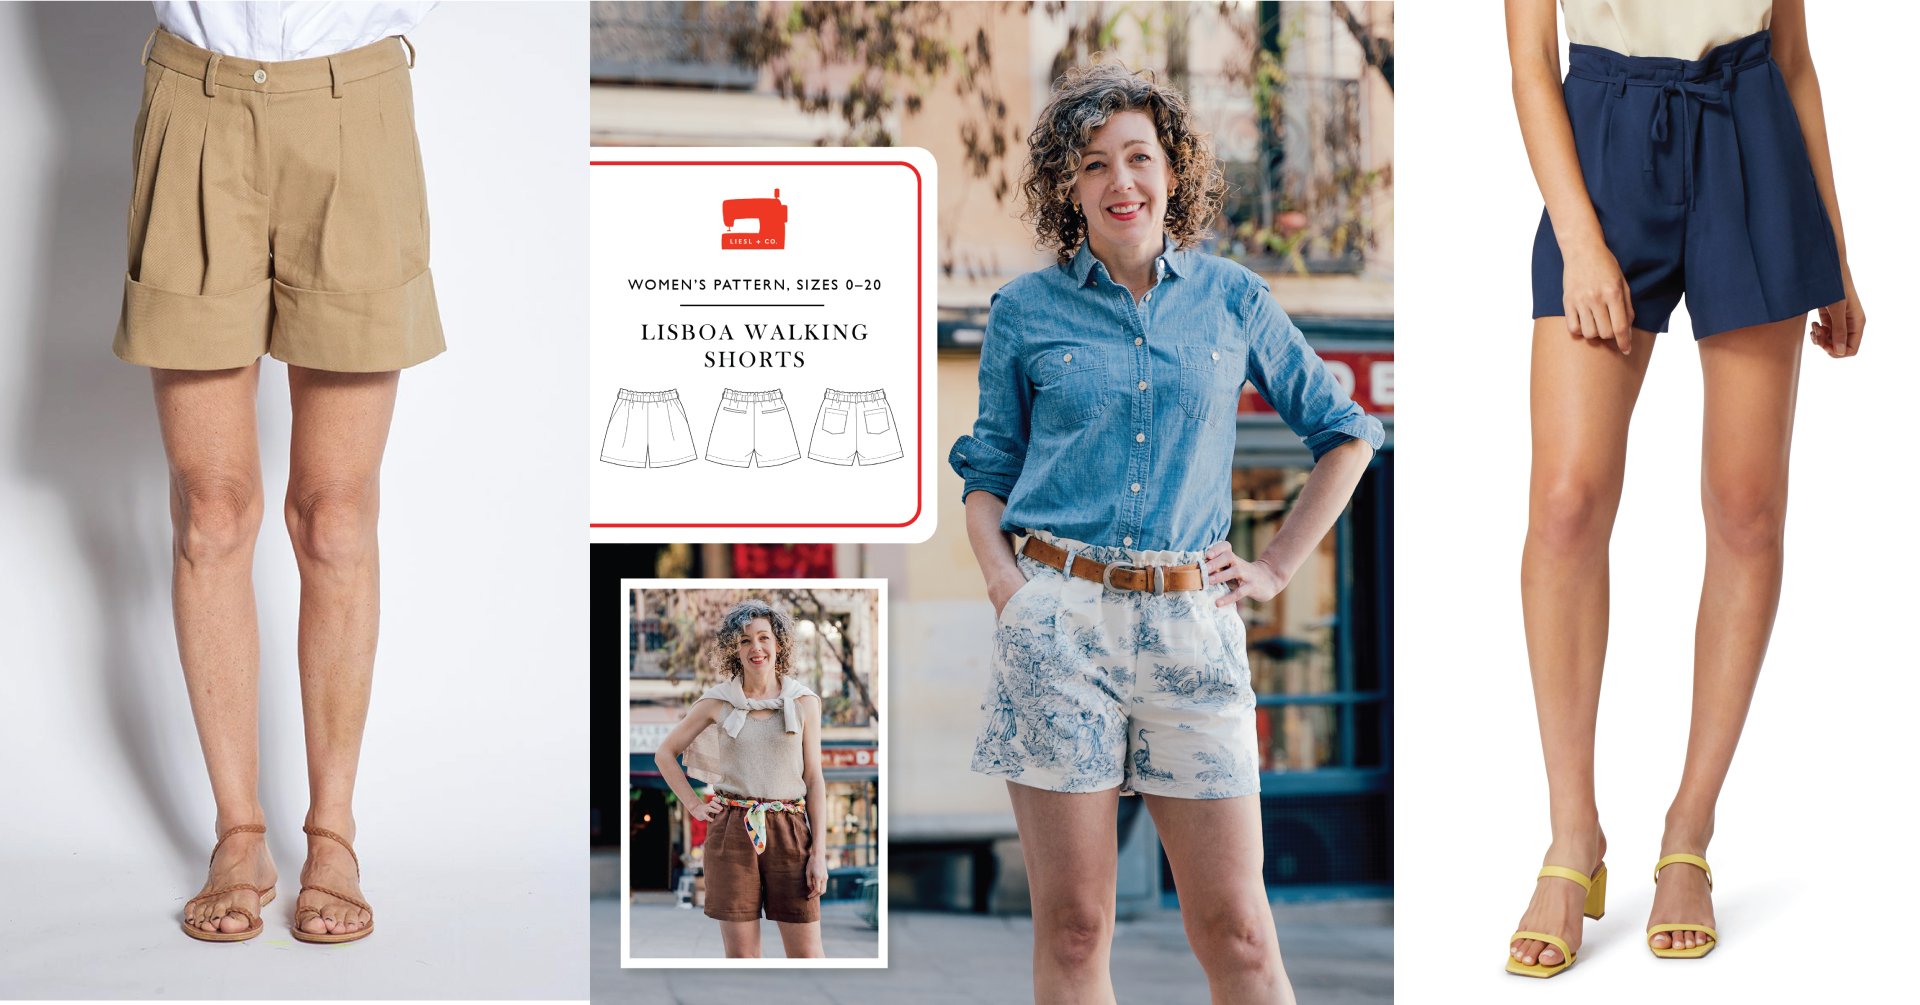 Inspiration and Fabric for the Lisboa Walking Shorts